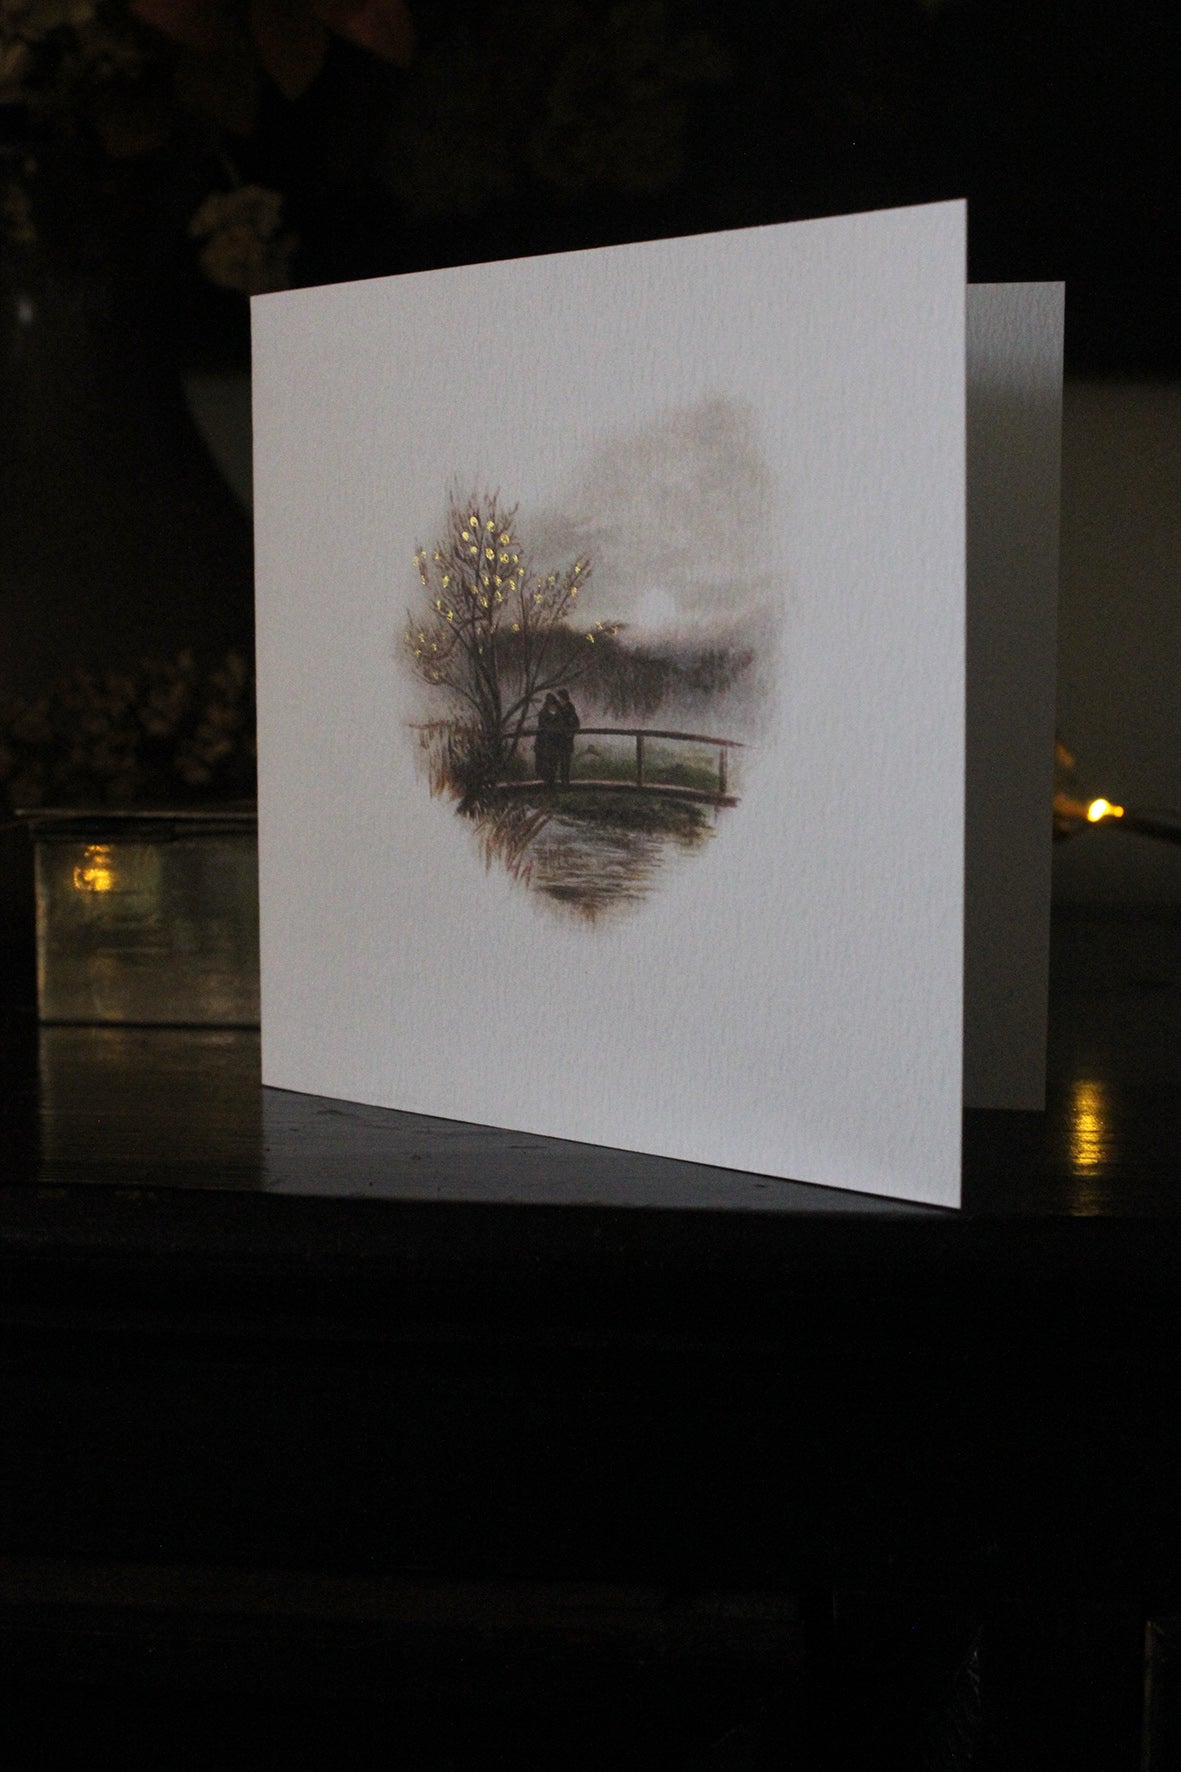 Winter Stories Greetings Card - The Much Loved Walk